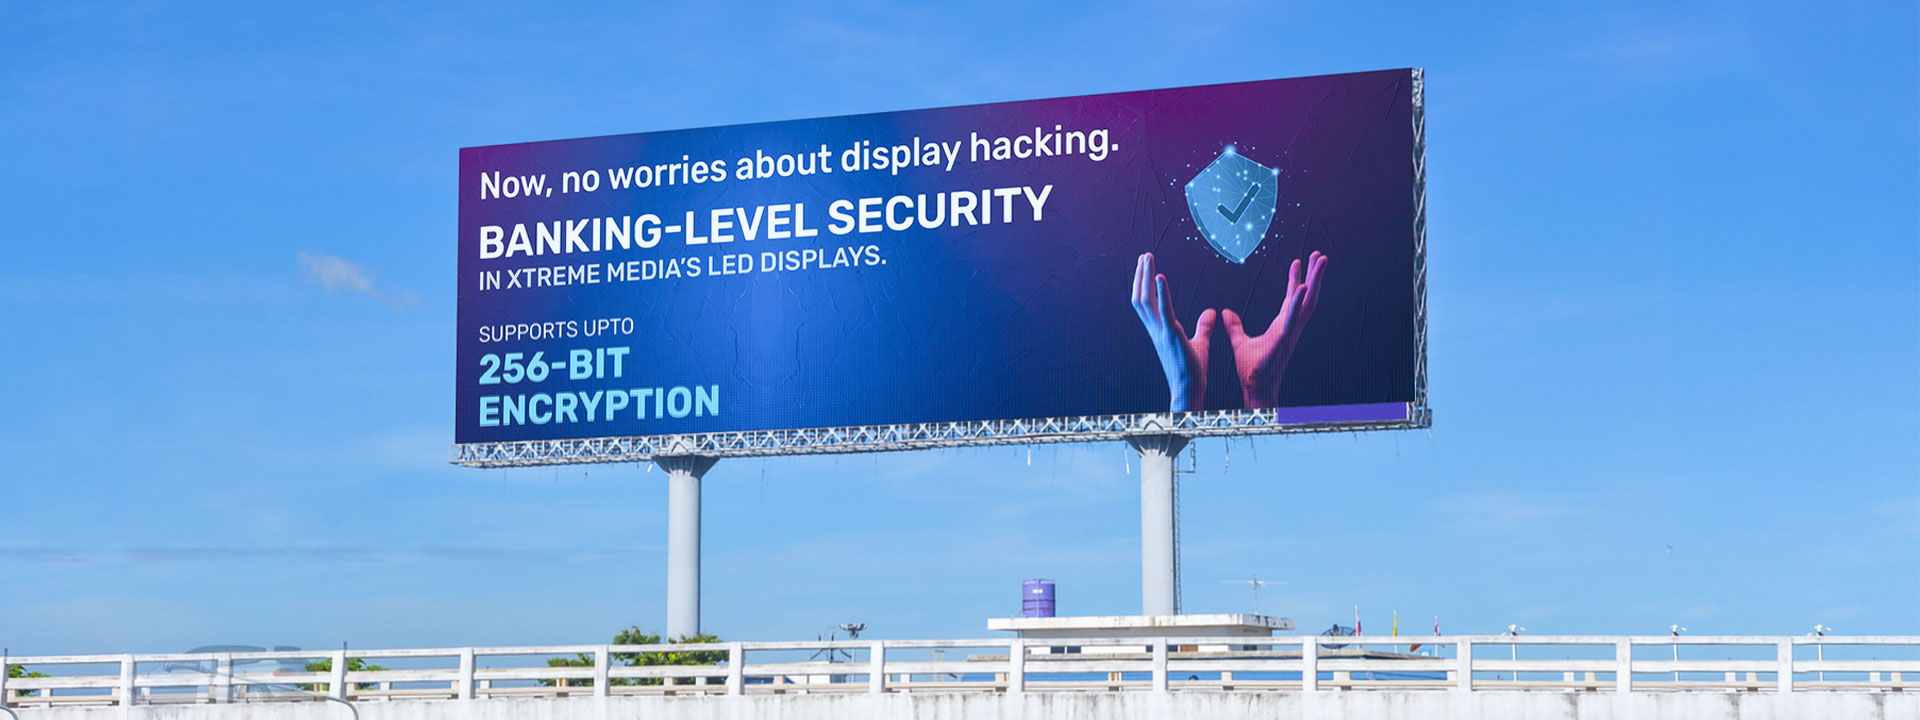 SECURITY: The Key To Protect LED Displays From Hacking